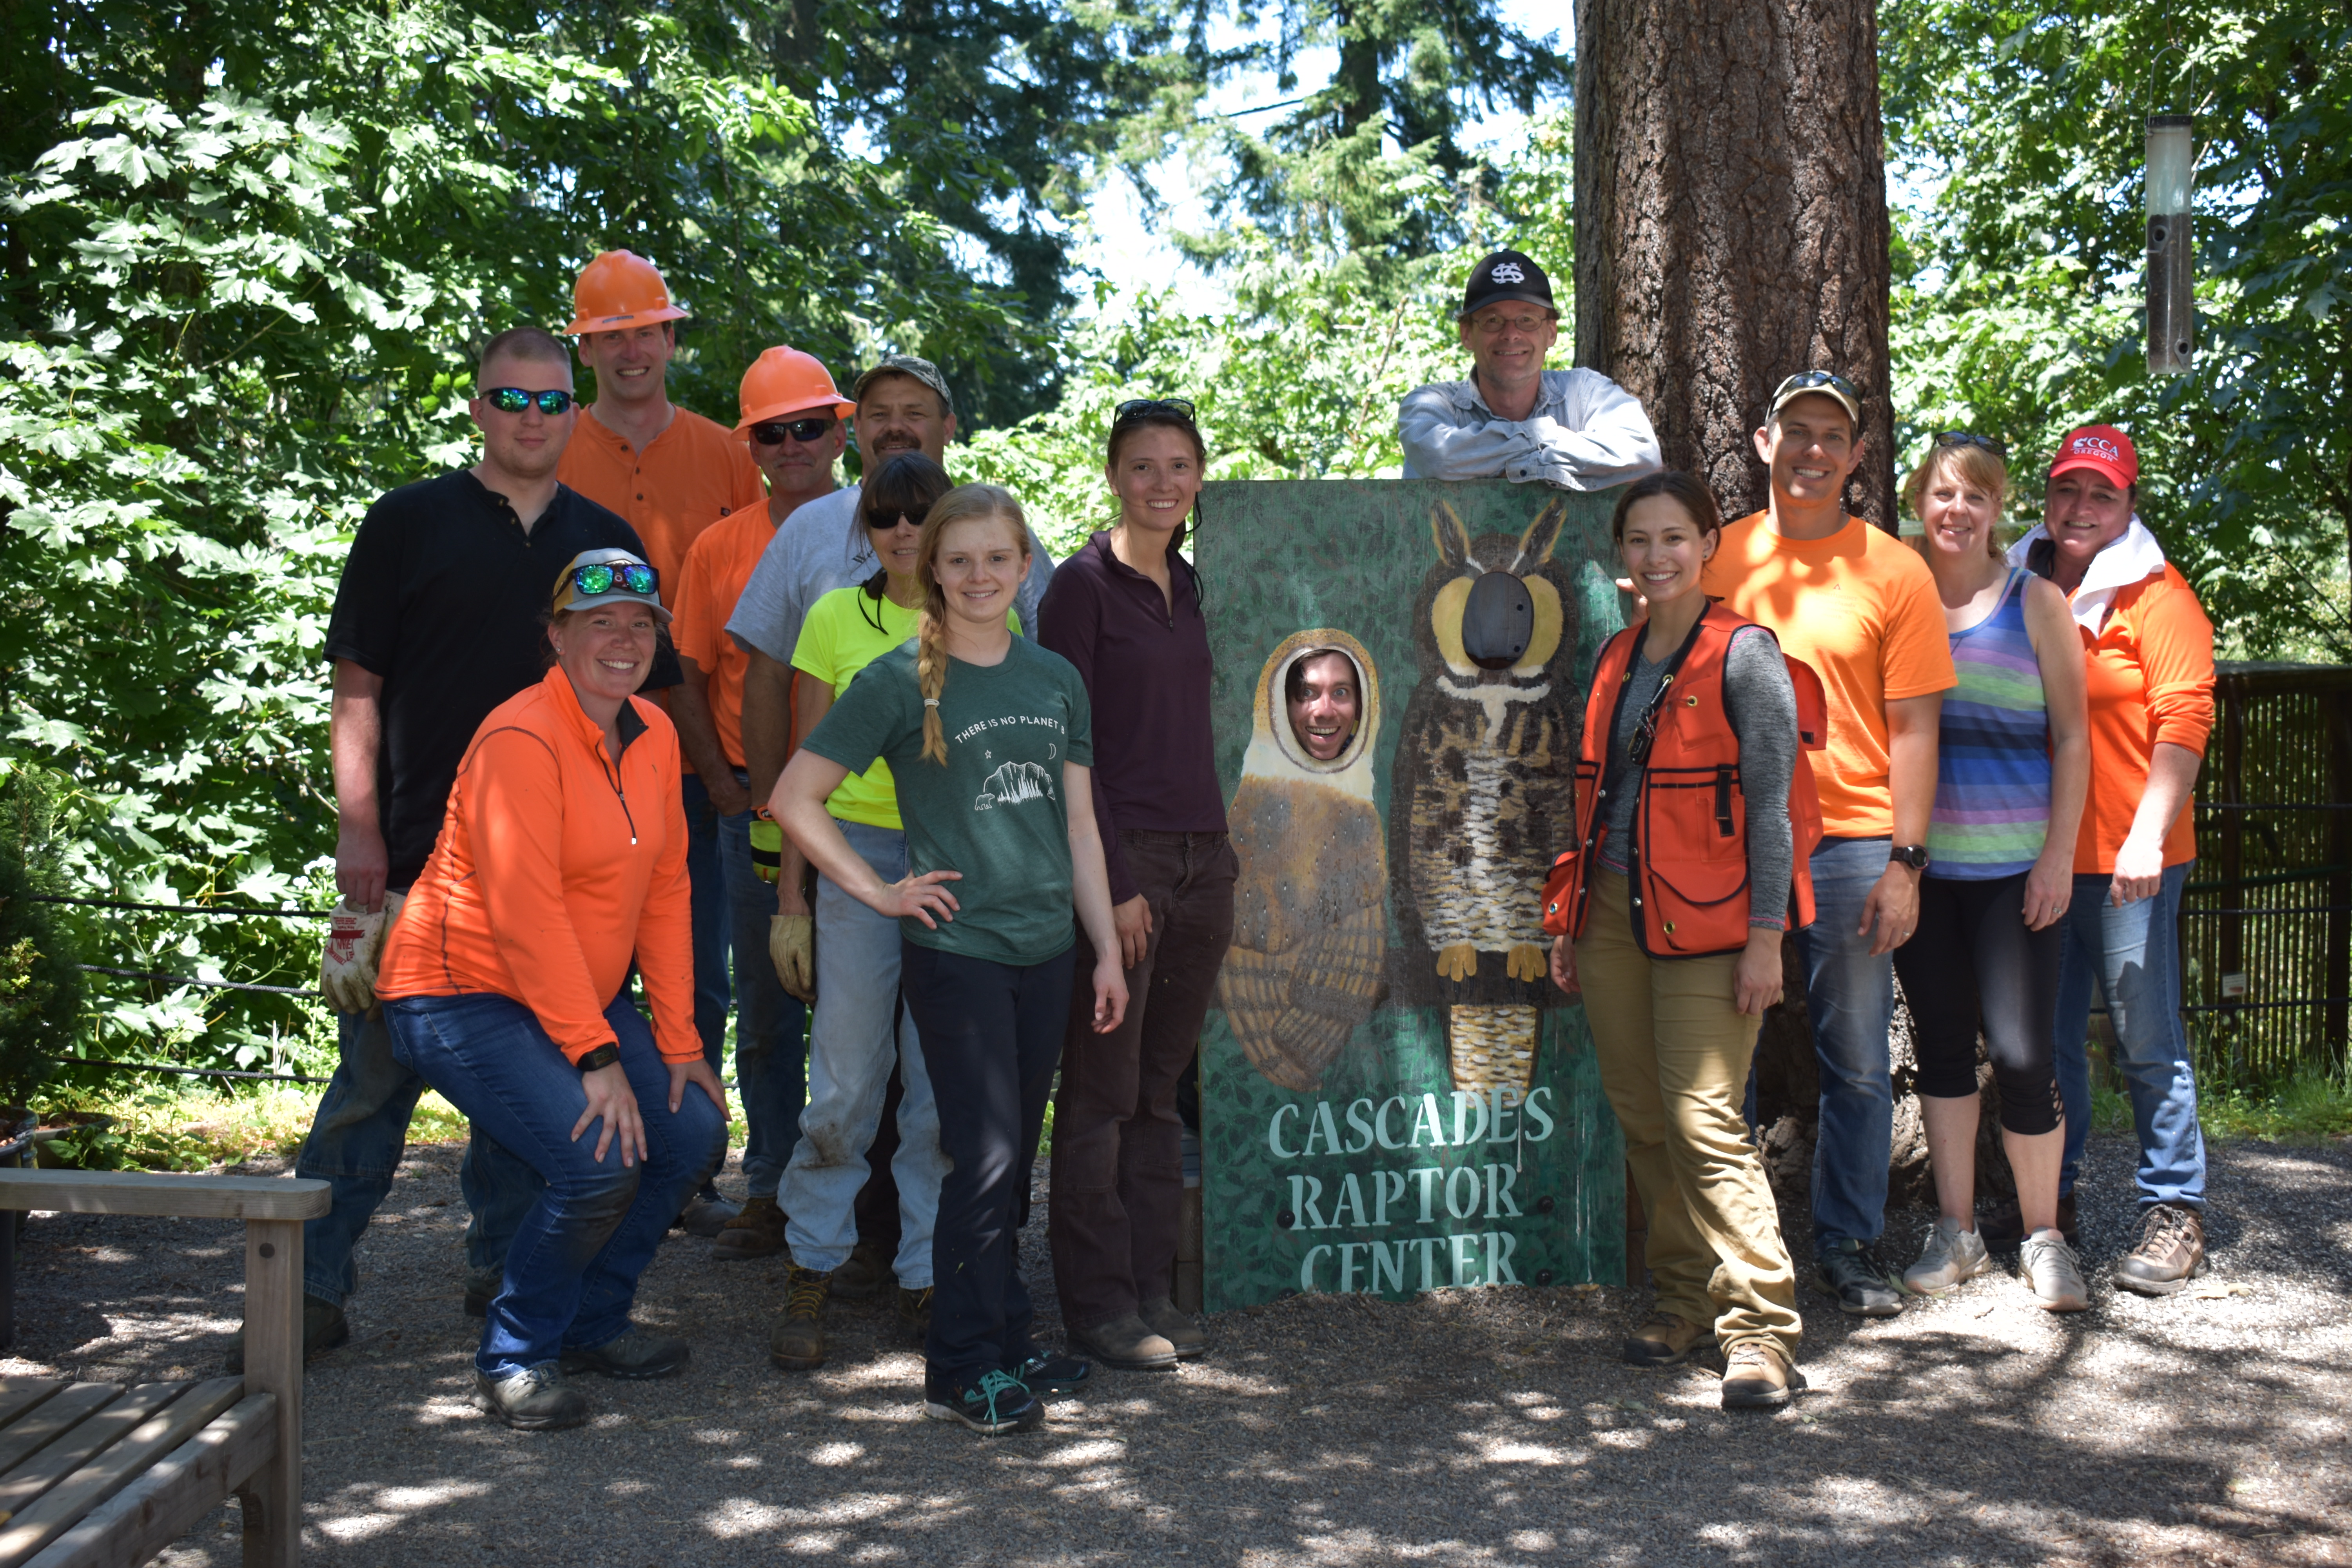 Image of Matt and a group of Weyerhaeuser volunteers participating in a clean-up event at the Cascades Raptor Center.